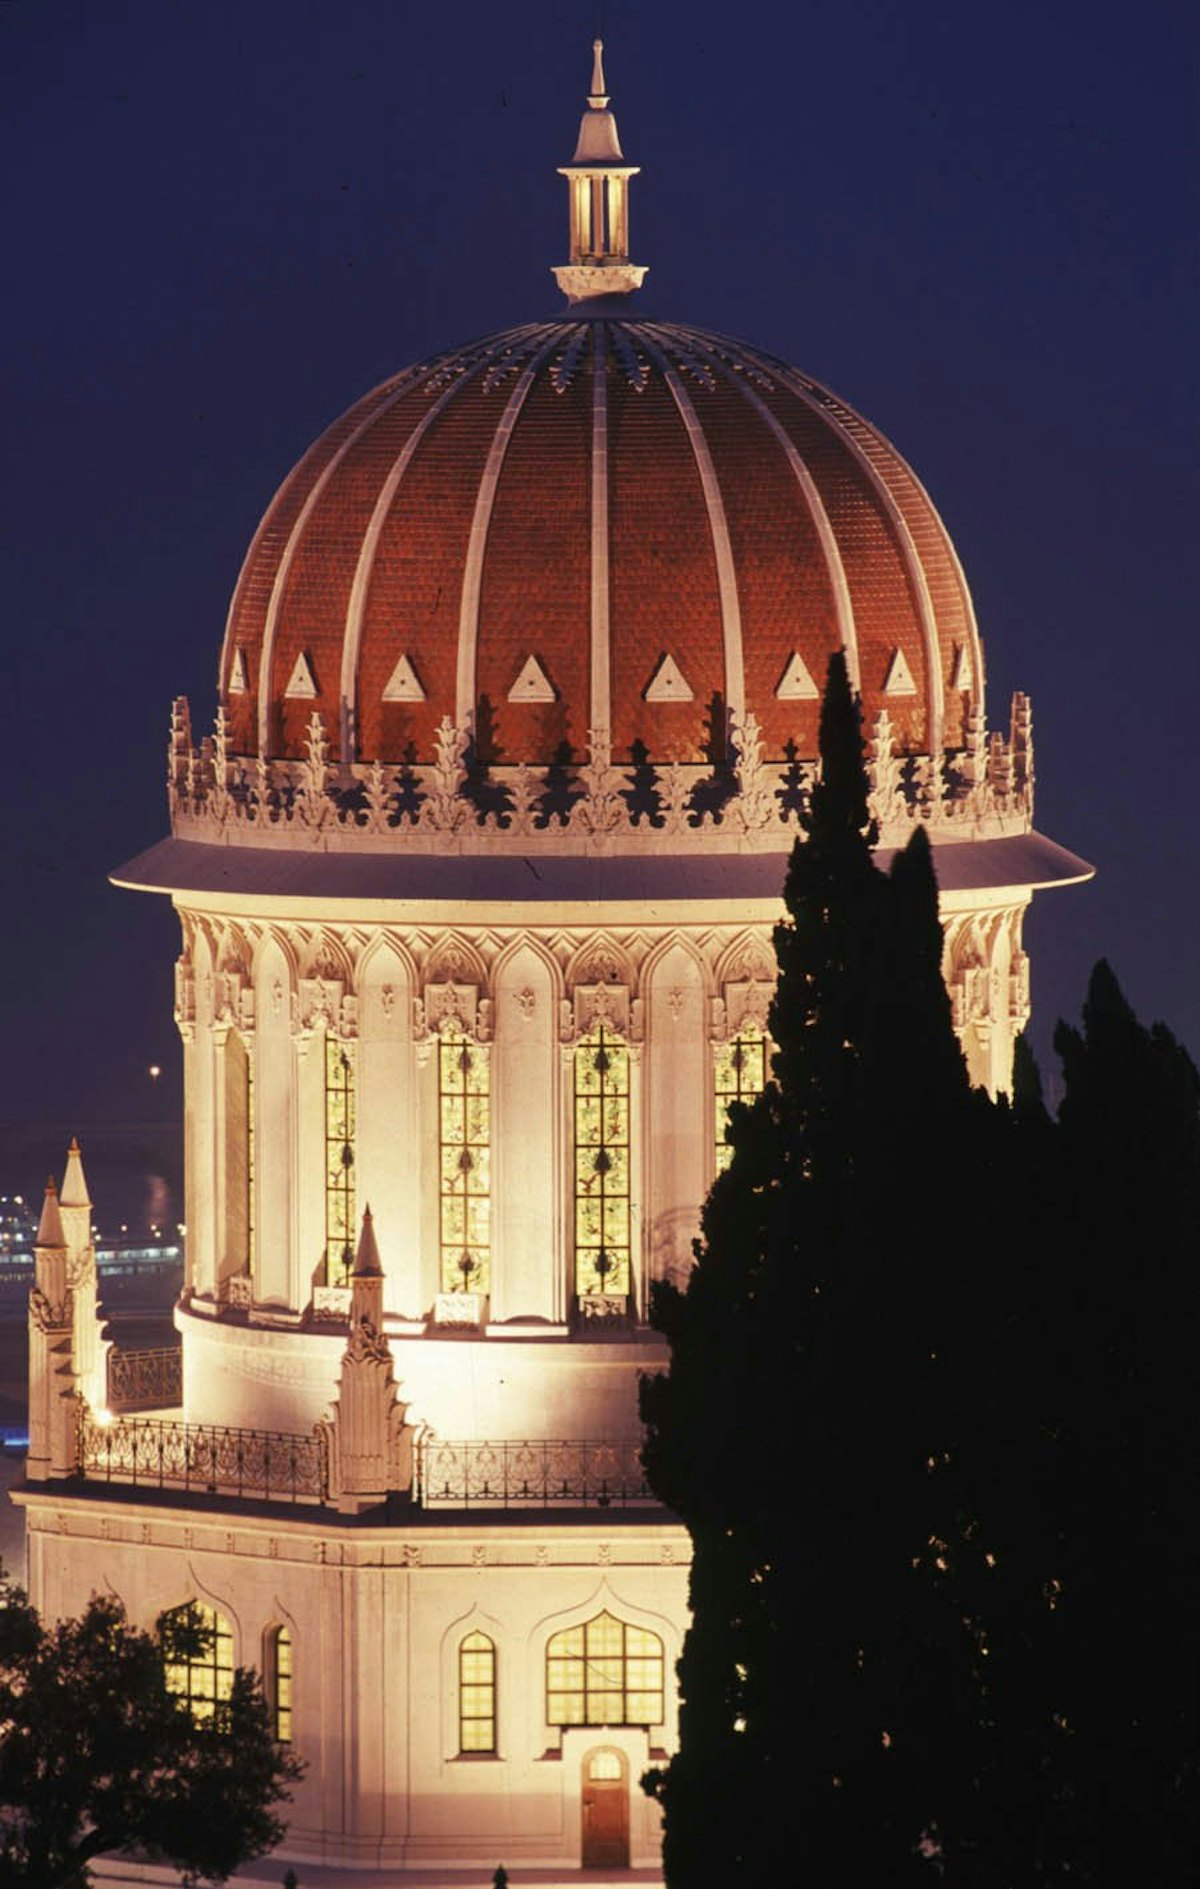 The Shrine of the Bab at night.